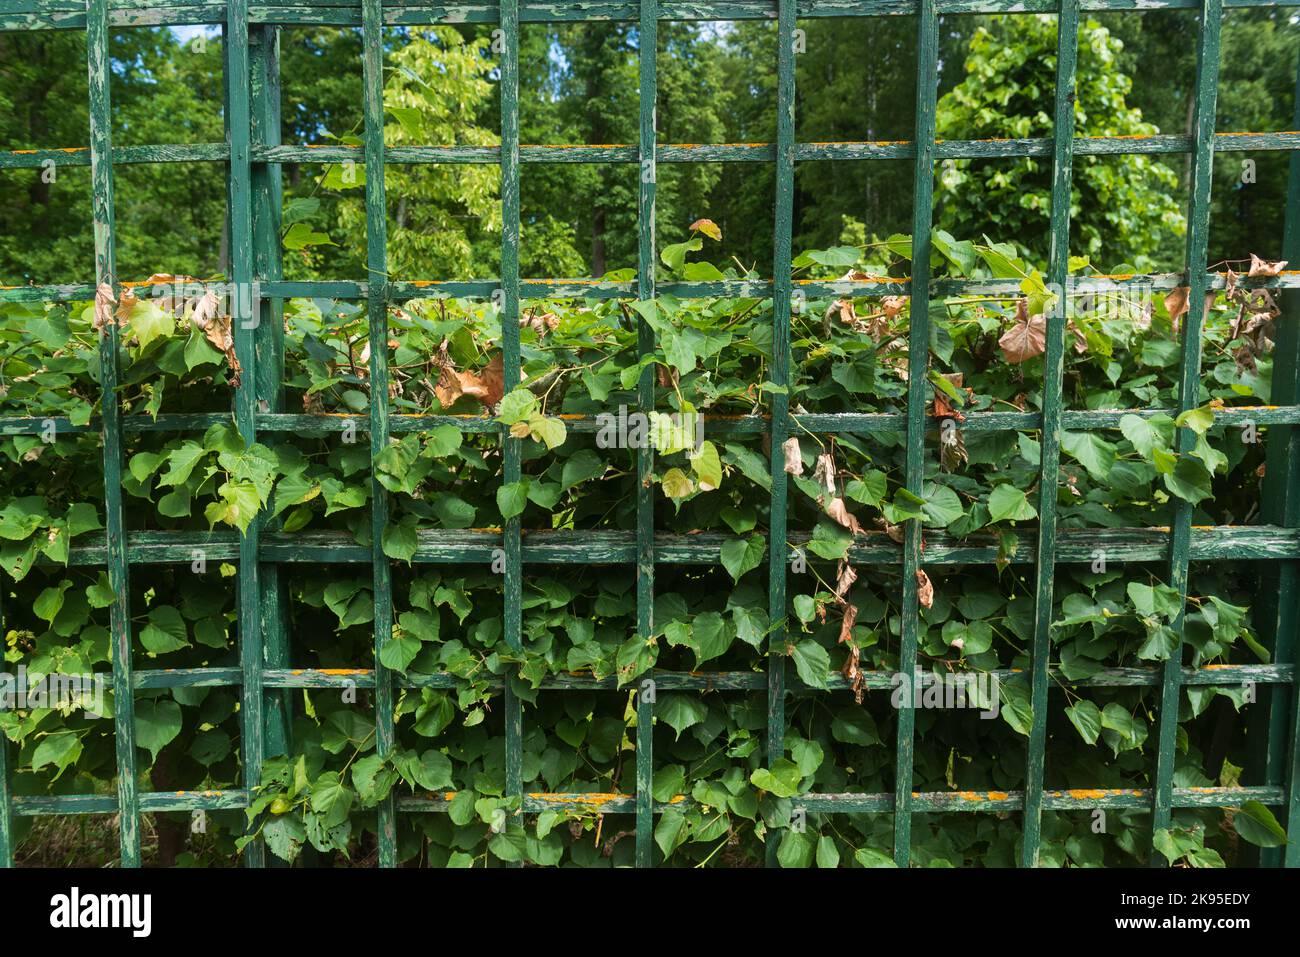 Ivy on the fence, floral background Stock Photo